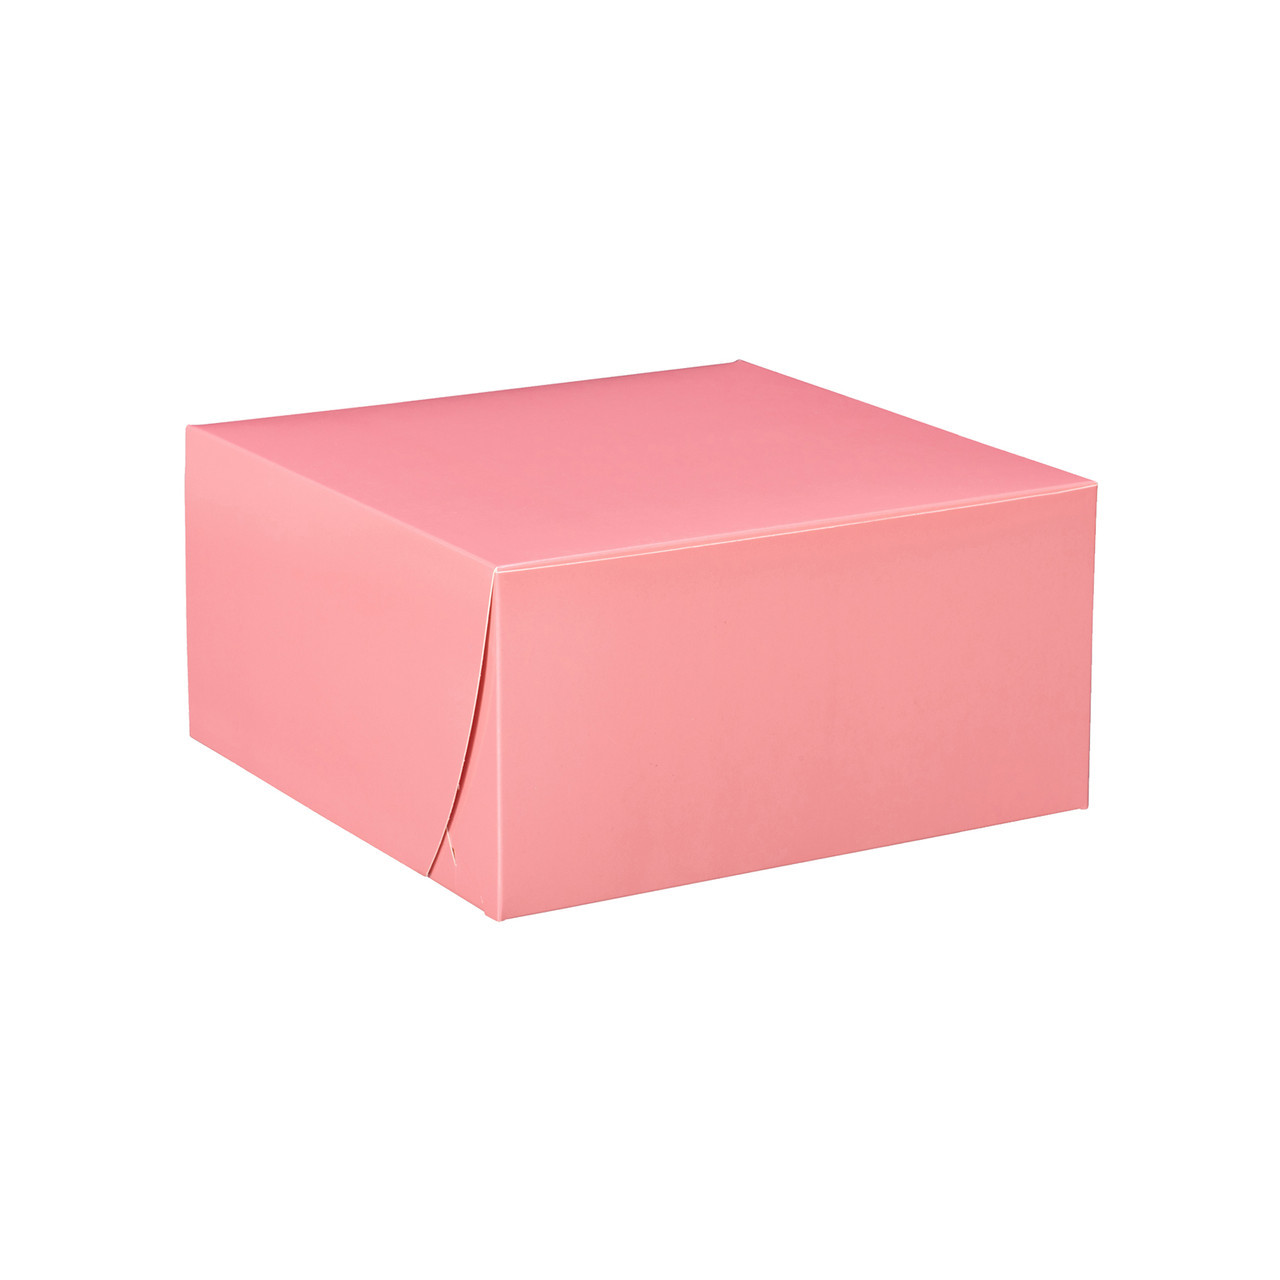 [10 Pack] Pink Bakery Boxes - 6.5 x 4 x 2.75 Inches Pink Cake Boxes - Pastry Box for Cupcakes, Desserts, Cookies, Candies - Ideal Packaging for